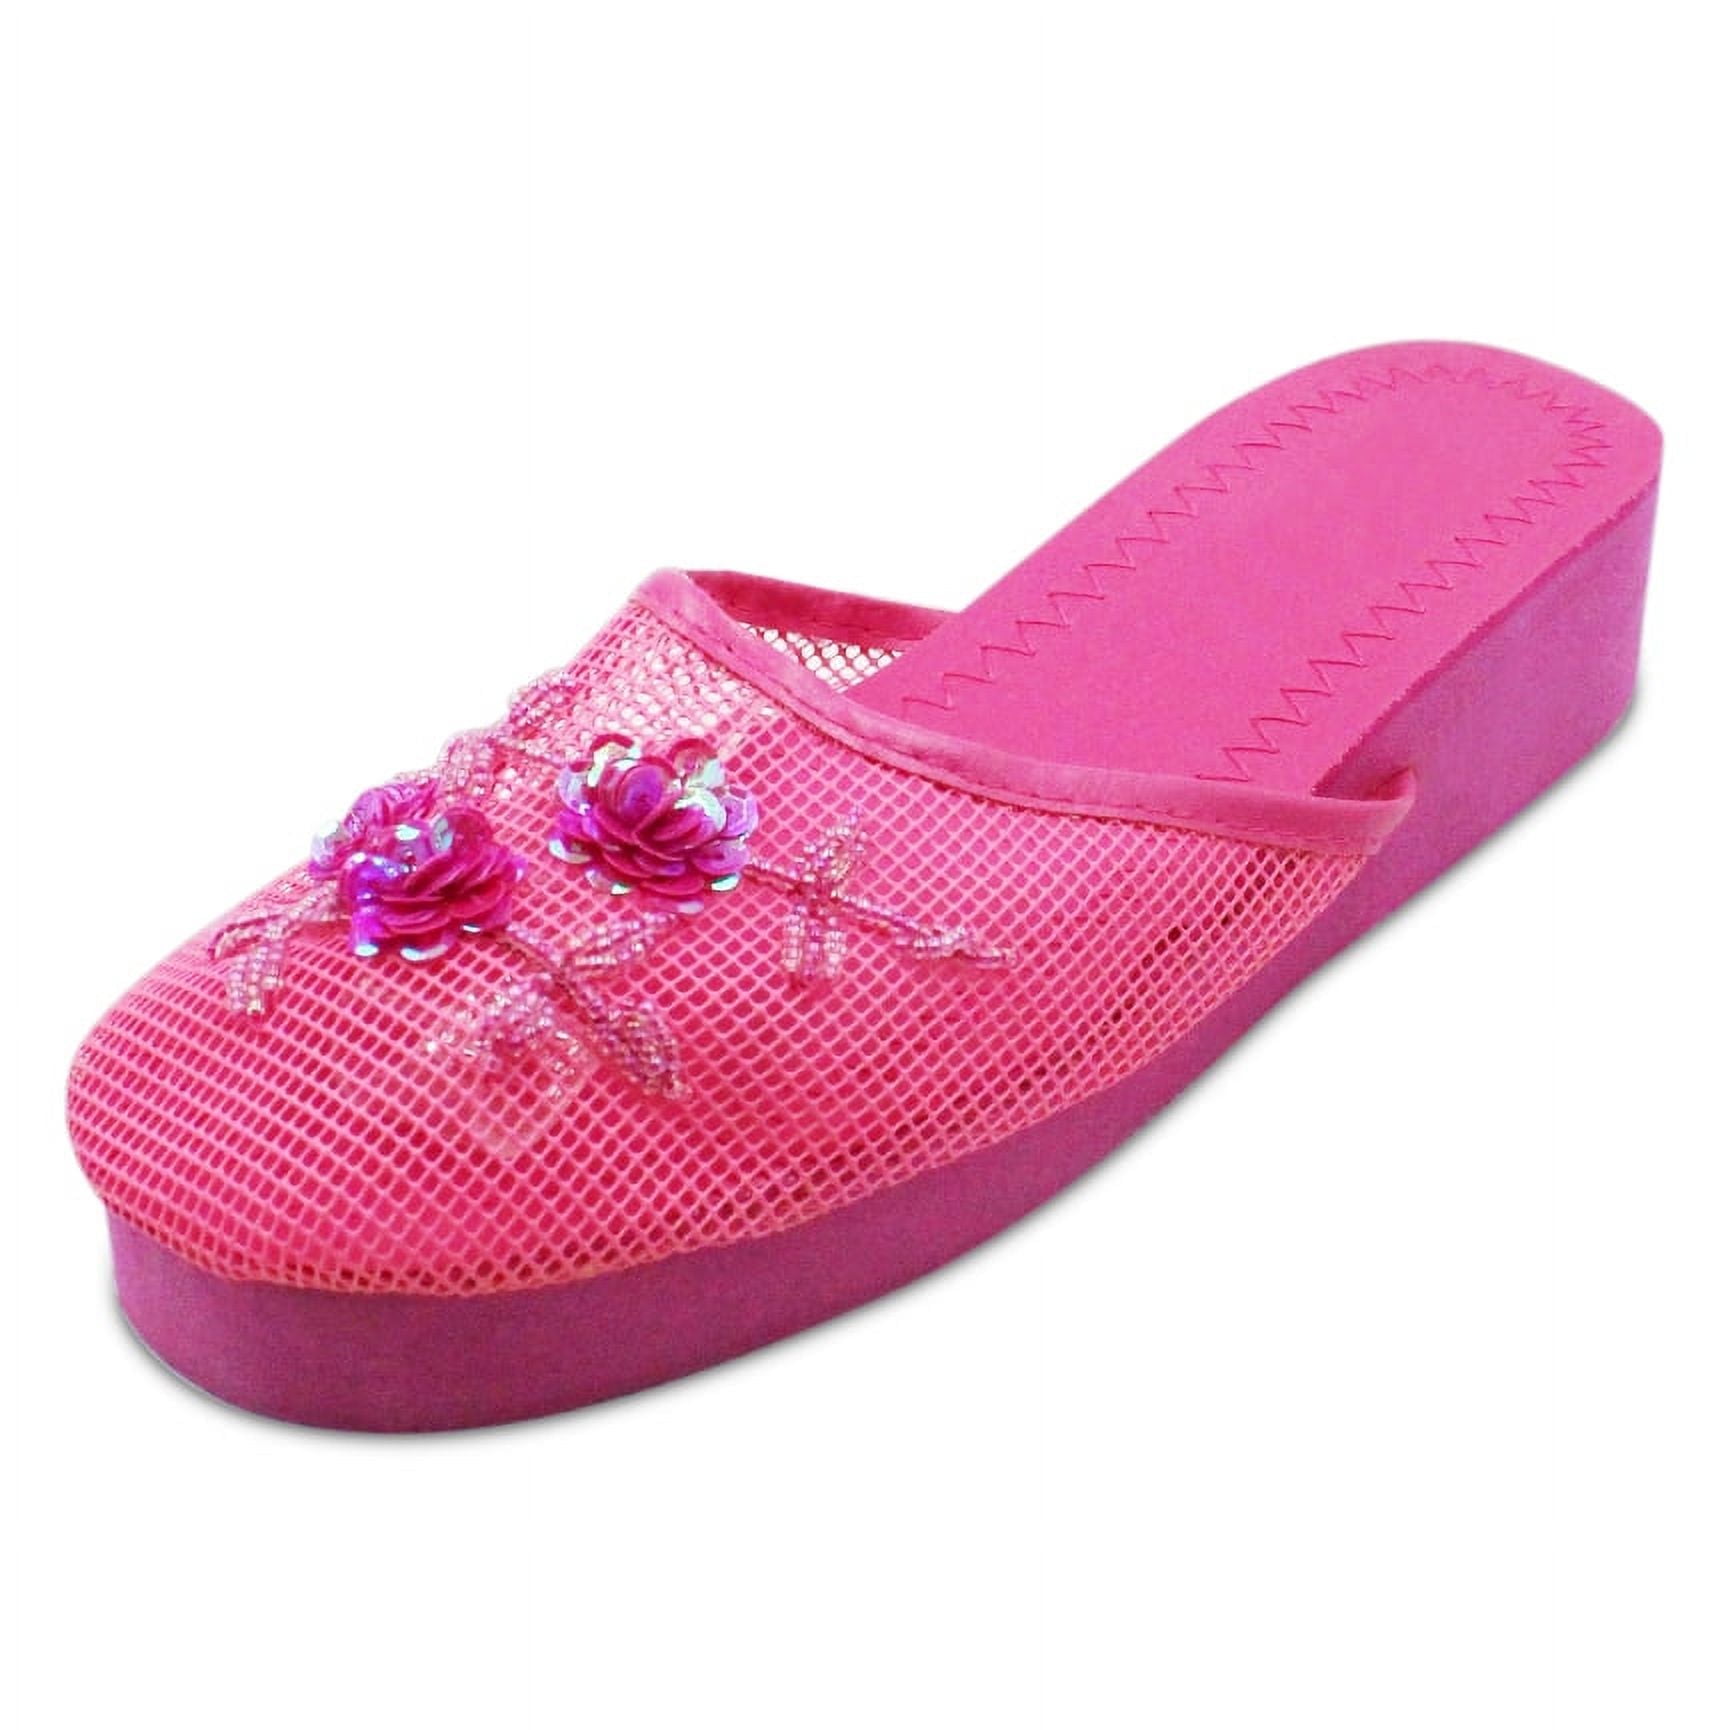 Sparkle and Shine with Women's UGG Sequin Slippers